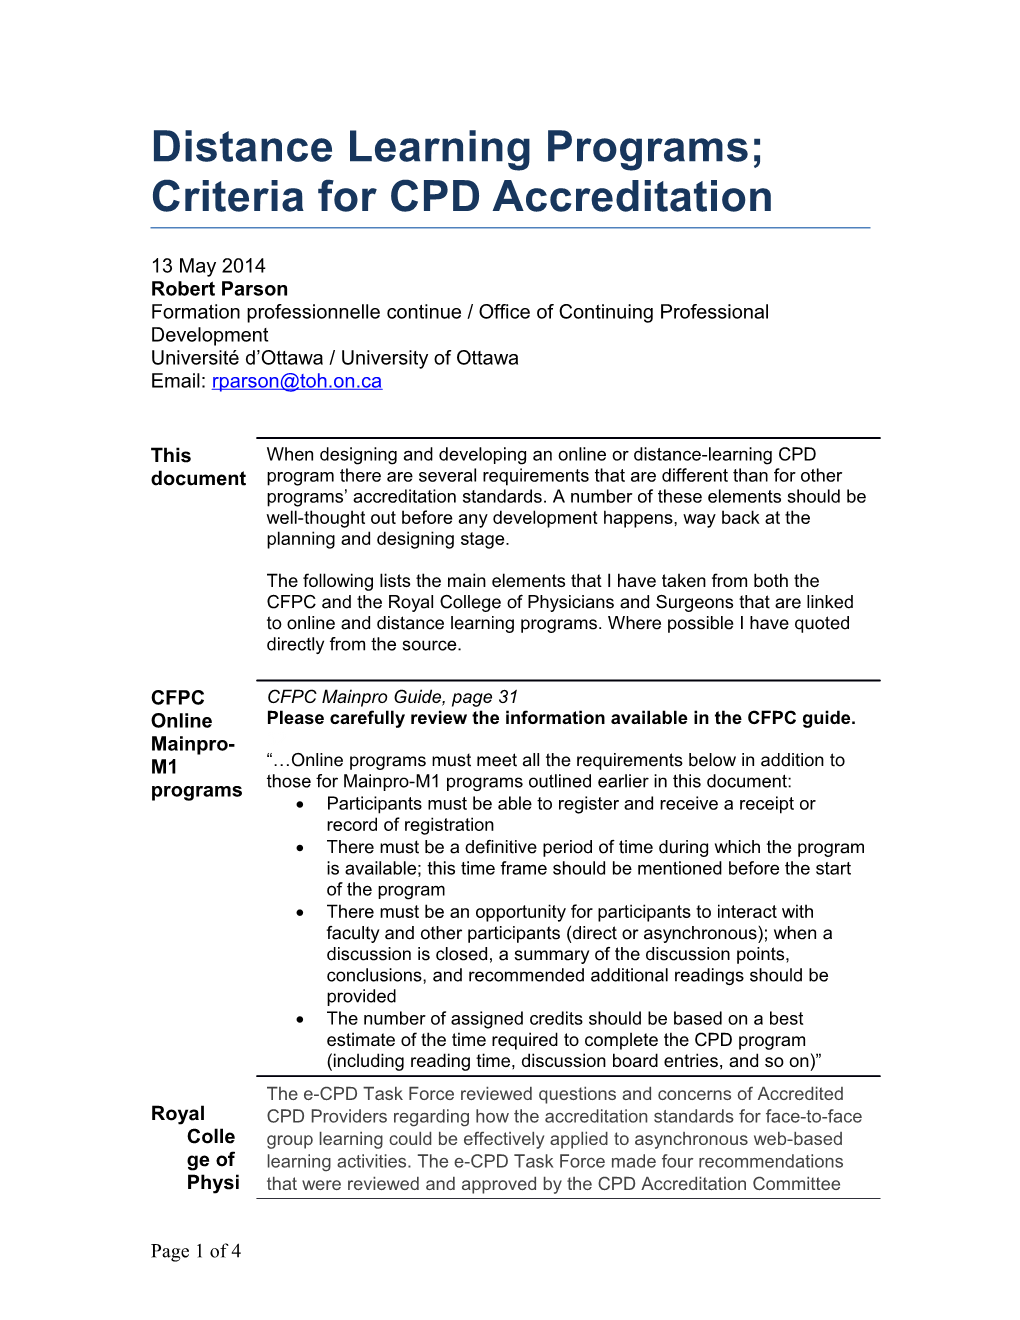 Distance Learning Programs; Criteria for CPD Accreditation